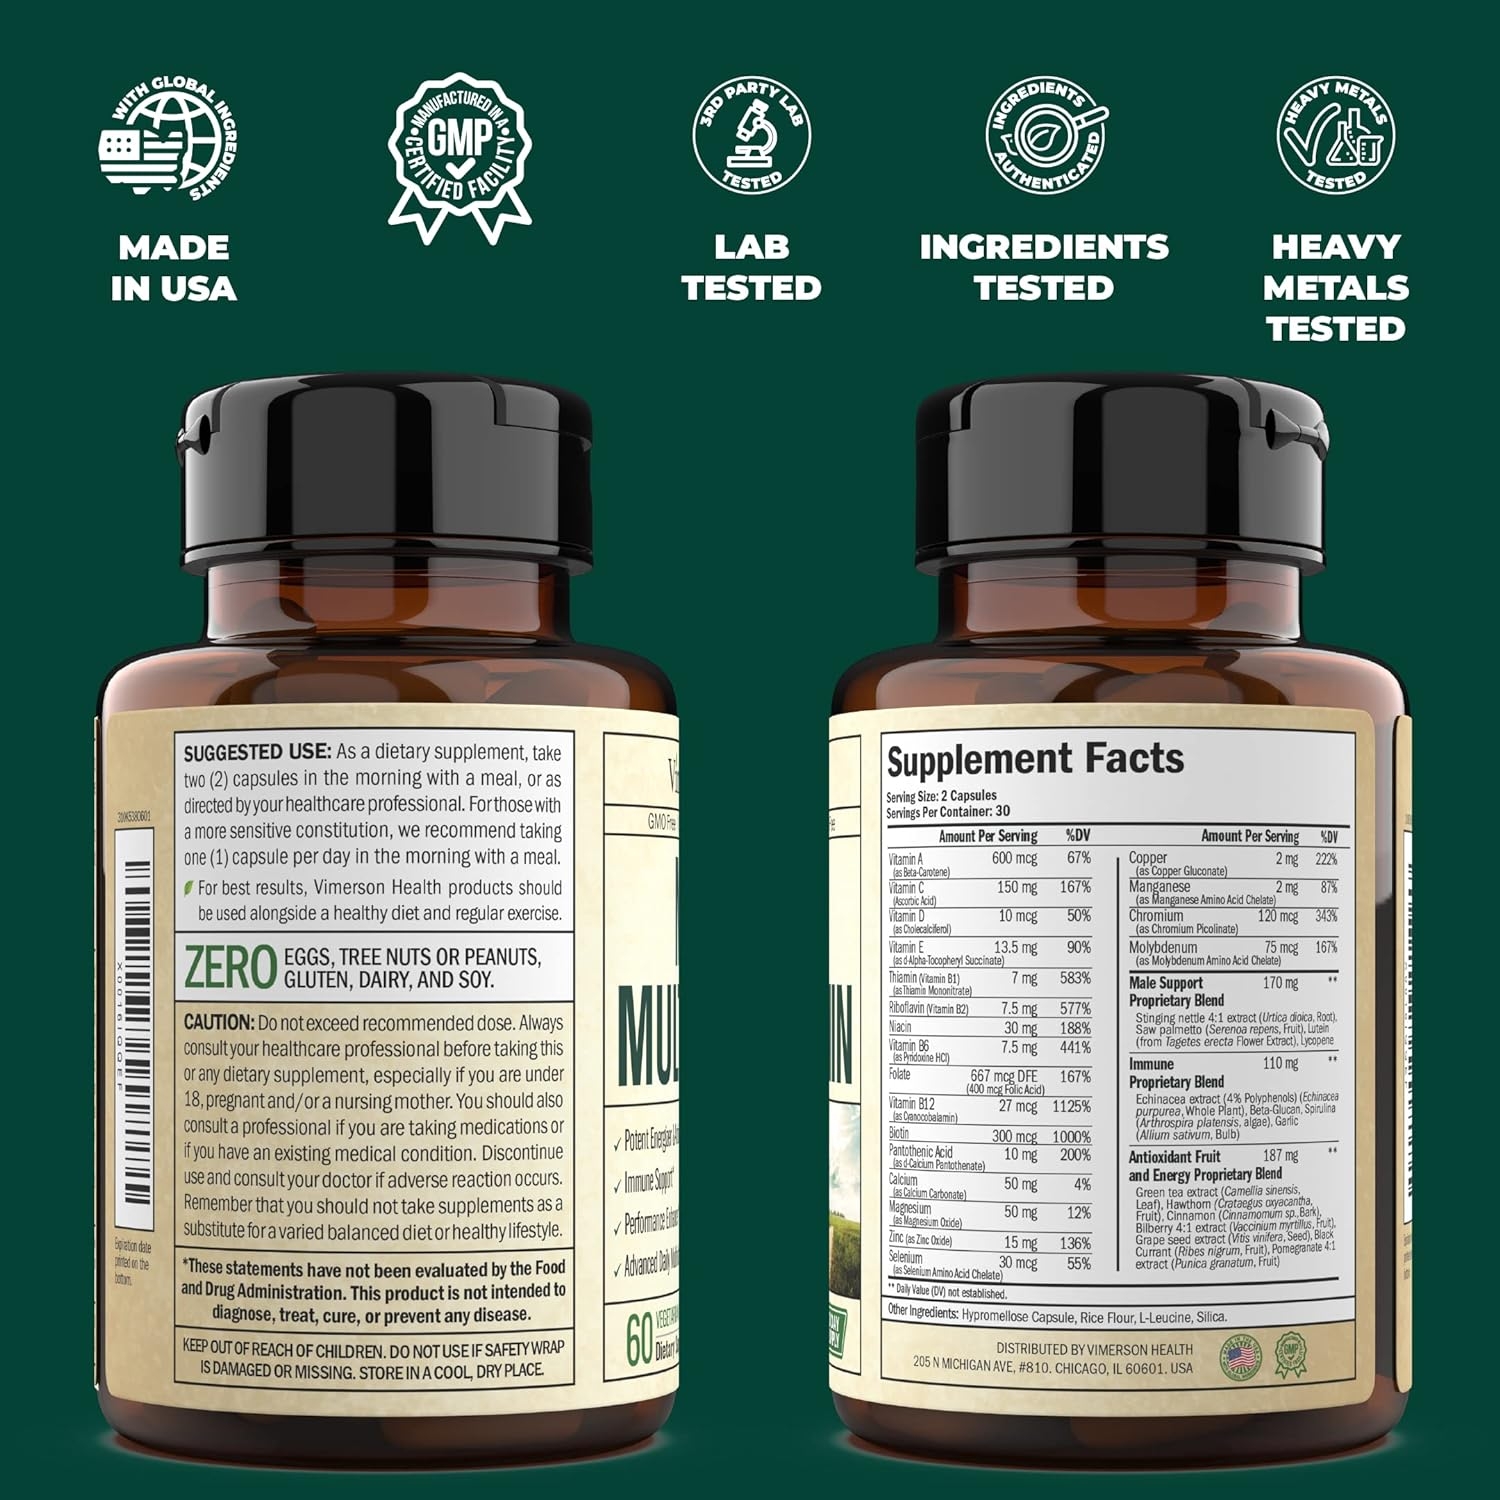 Men's Daily Multimineral Multivitamin Supplement - Vitamins A, C, E, D, B1, B2, B3, B5, B6, B12. Magnesium, Biotin, Spirulina, Zinc. Complete Immune Support with Antioxidant Properties. 60 Capsules